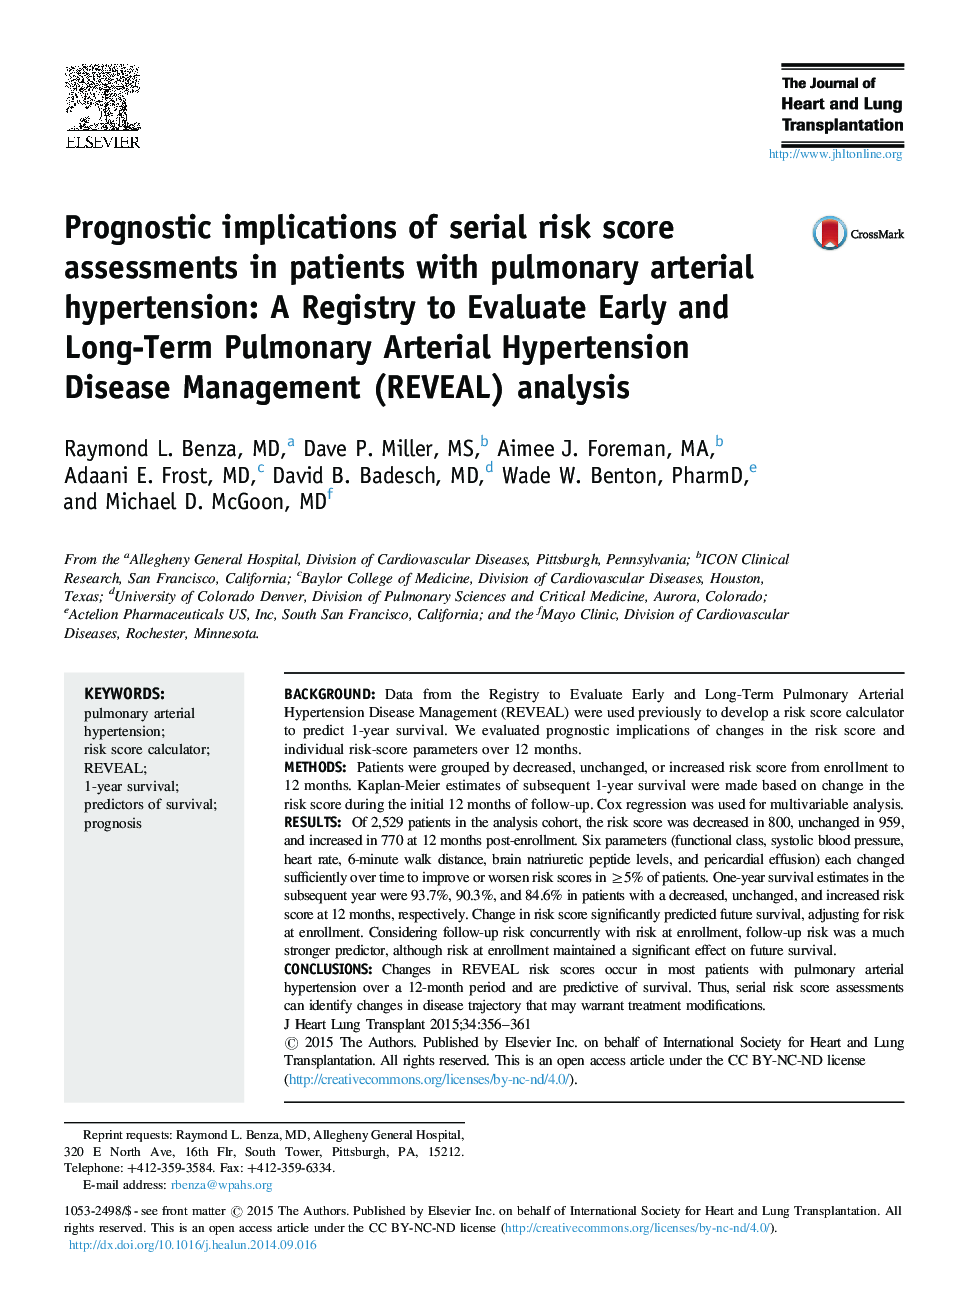 Prognostic implications of serial risk score assessments in patients with pulmonary arterial hypertension: A Registry to Evaluate Early and Long-Term Pulmonary Arterial Hypertension Disease Management (REVEAL) analysis